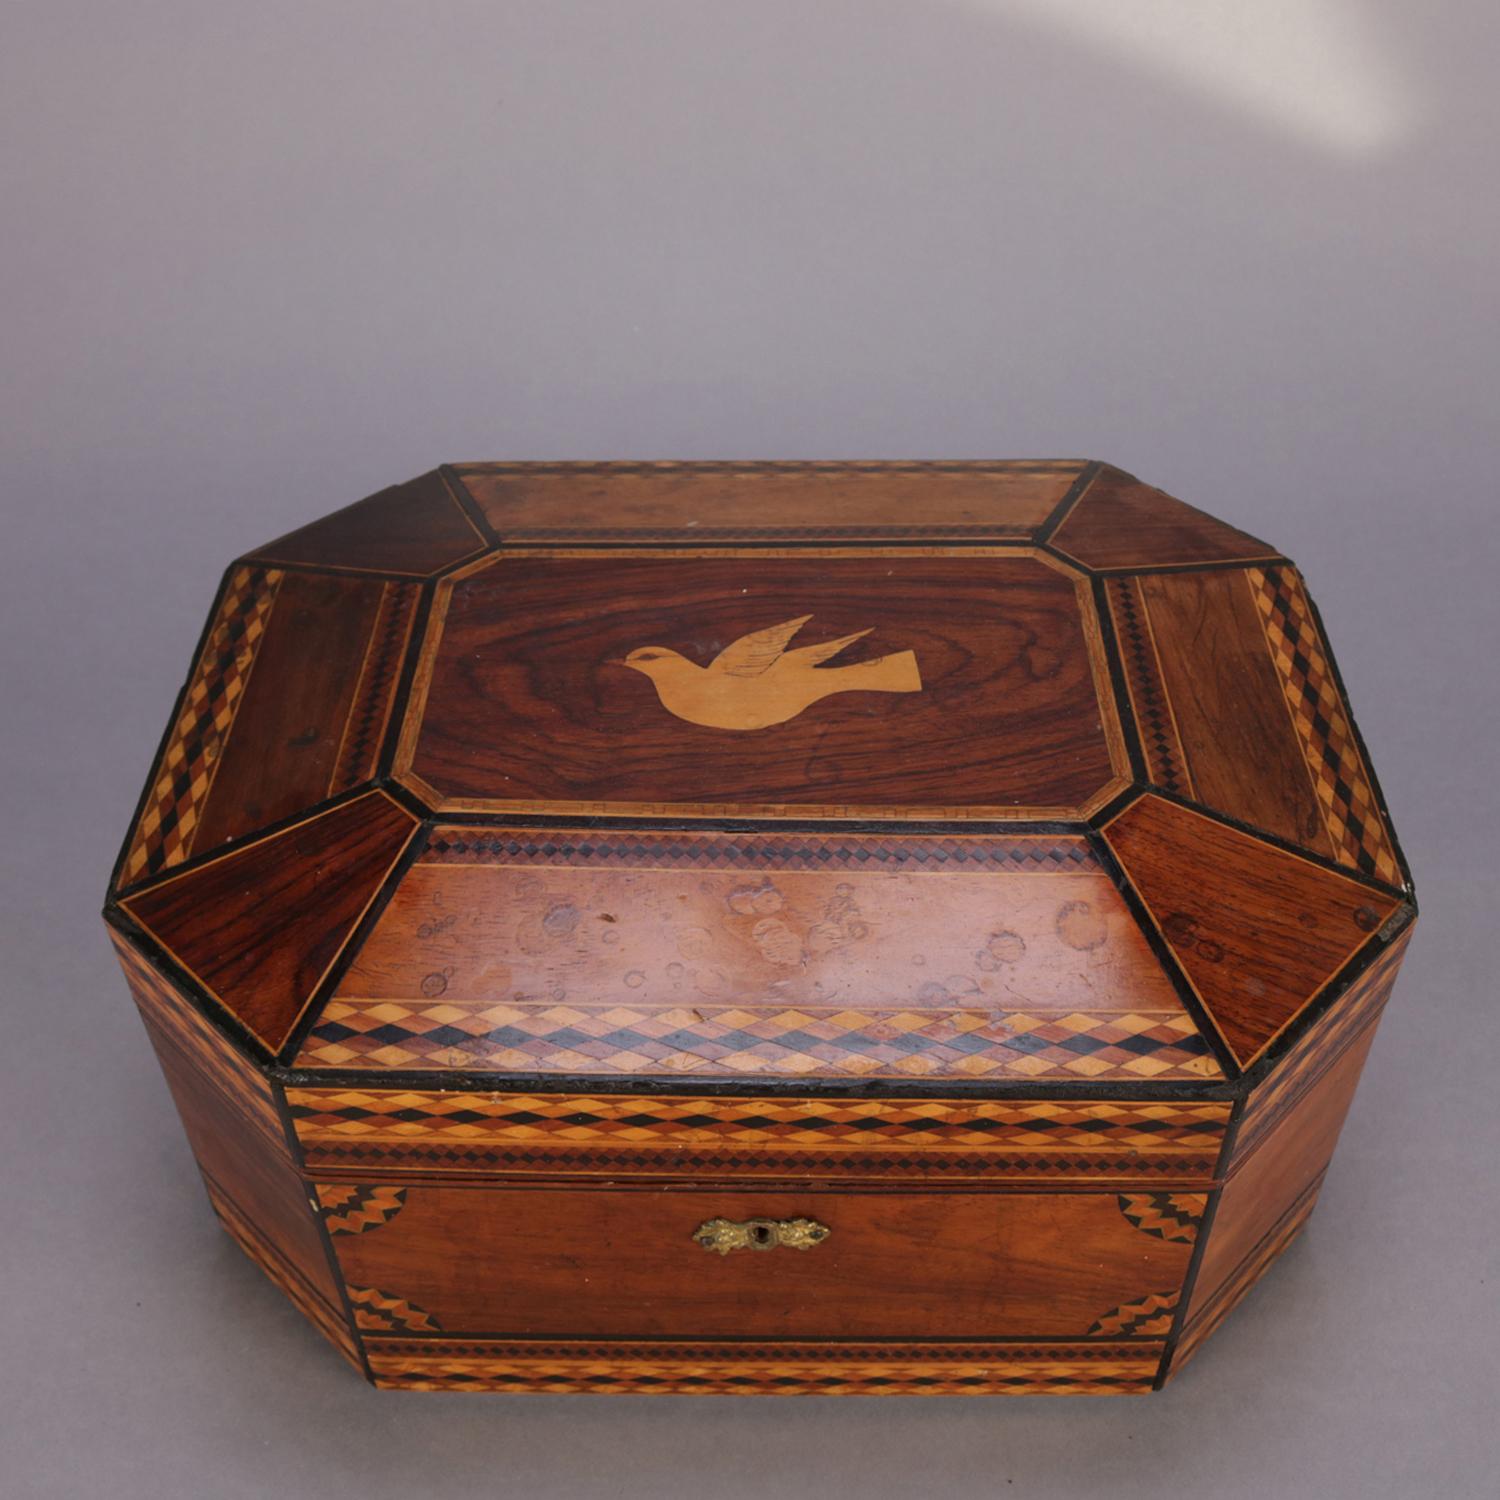 An antique mahogany marquetry jewelry box features clipped corner form with faceted lid having central satinwood inlaid dove with repeating diamond bordering with sunburst corbelles, velvet lined interior with bevelled mirror and tray, 19th